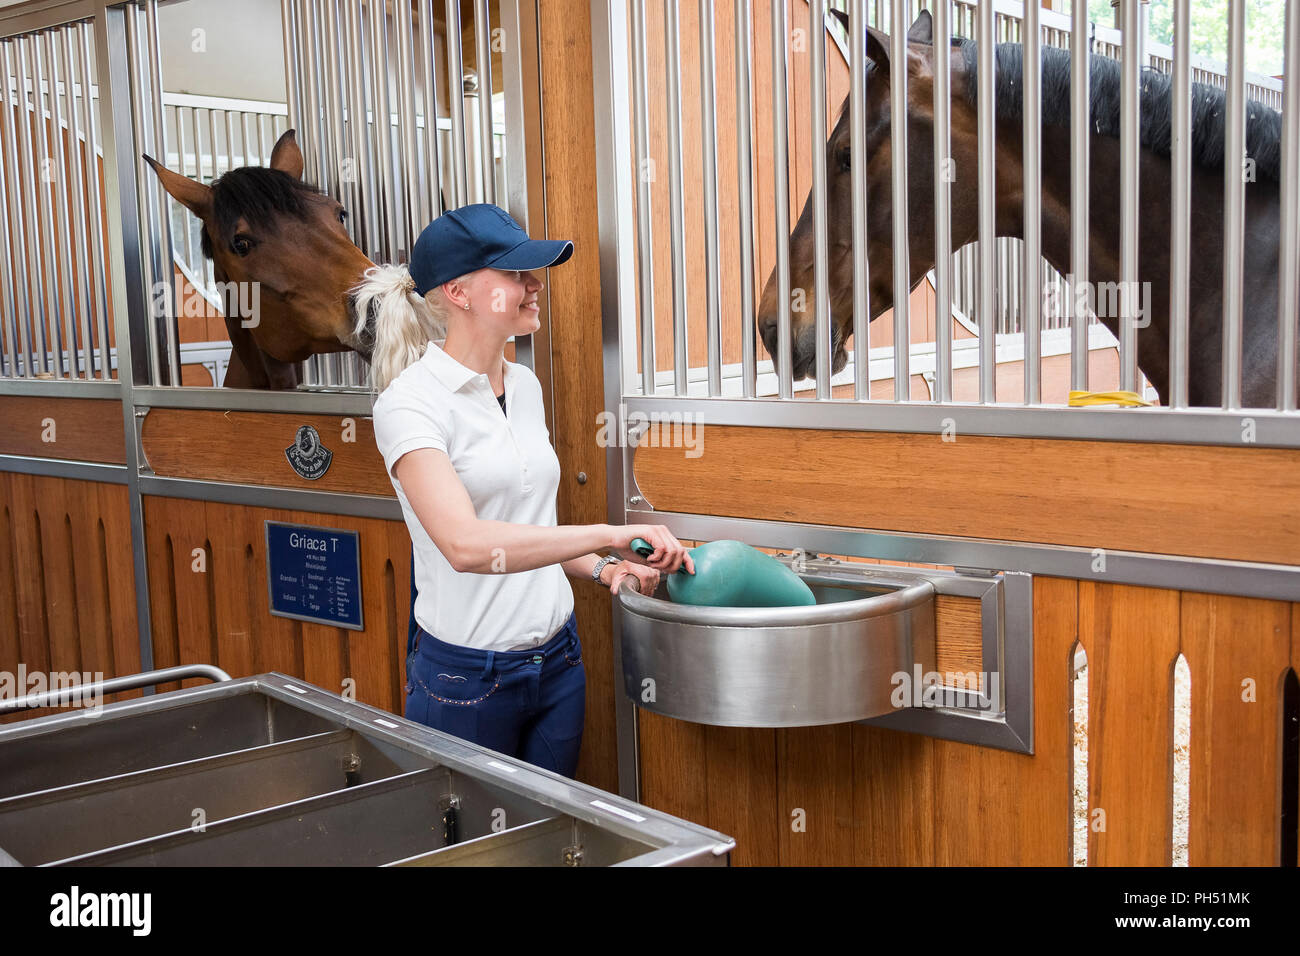 Warmblood Horse. Groom feeding horse in a stable. Germany Stock Photo